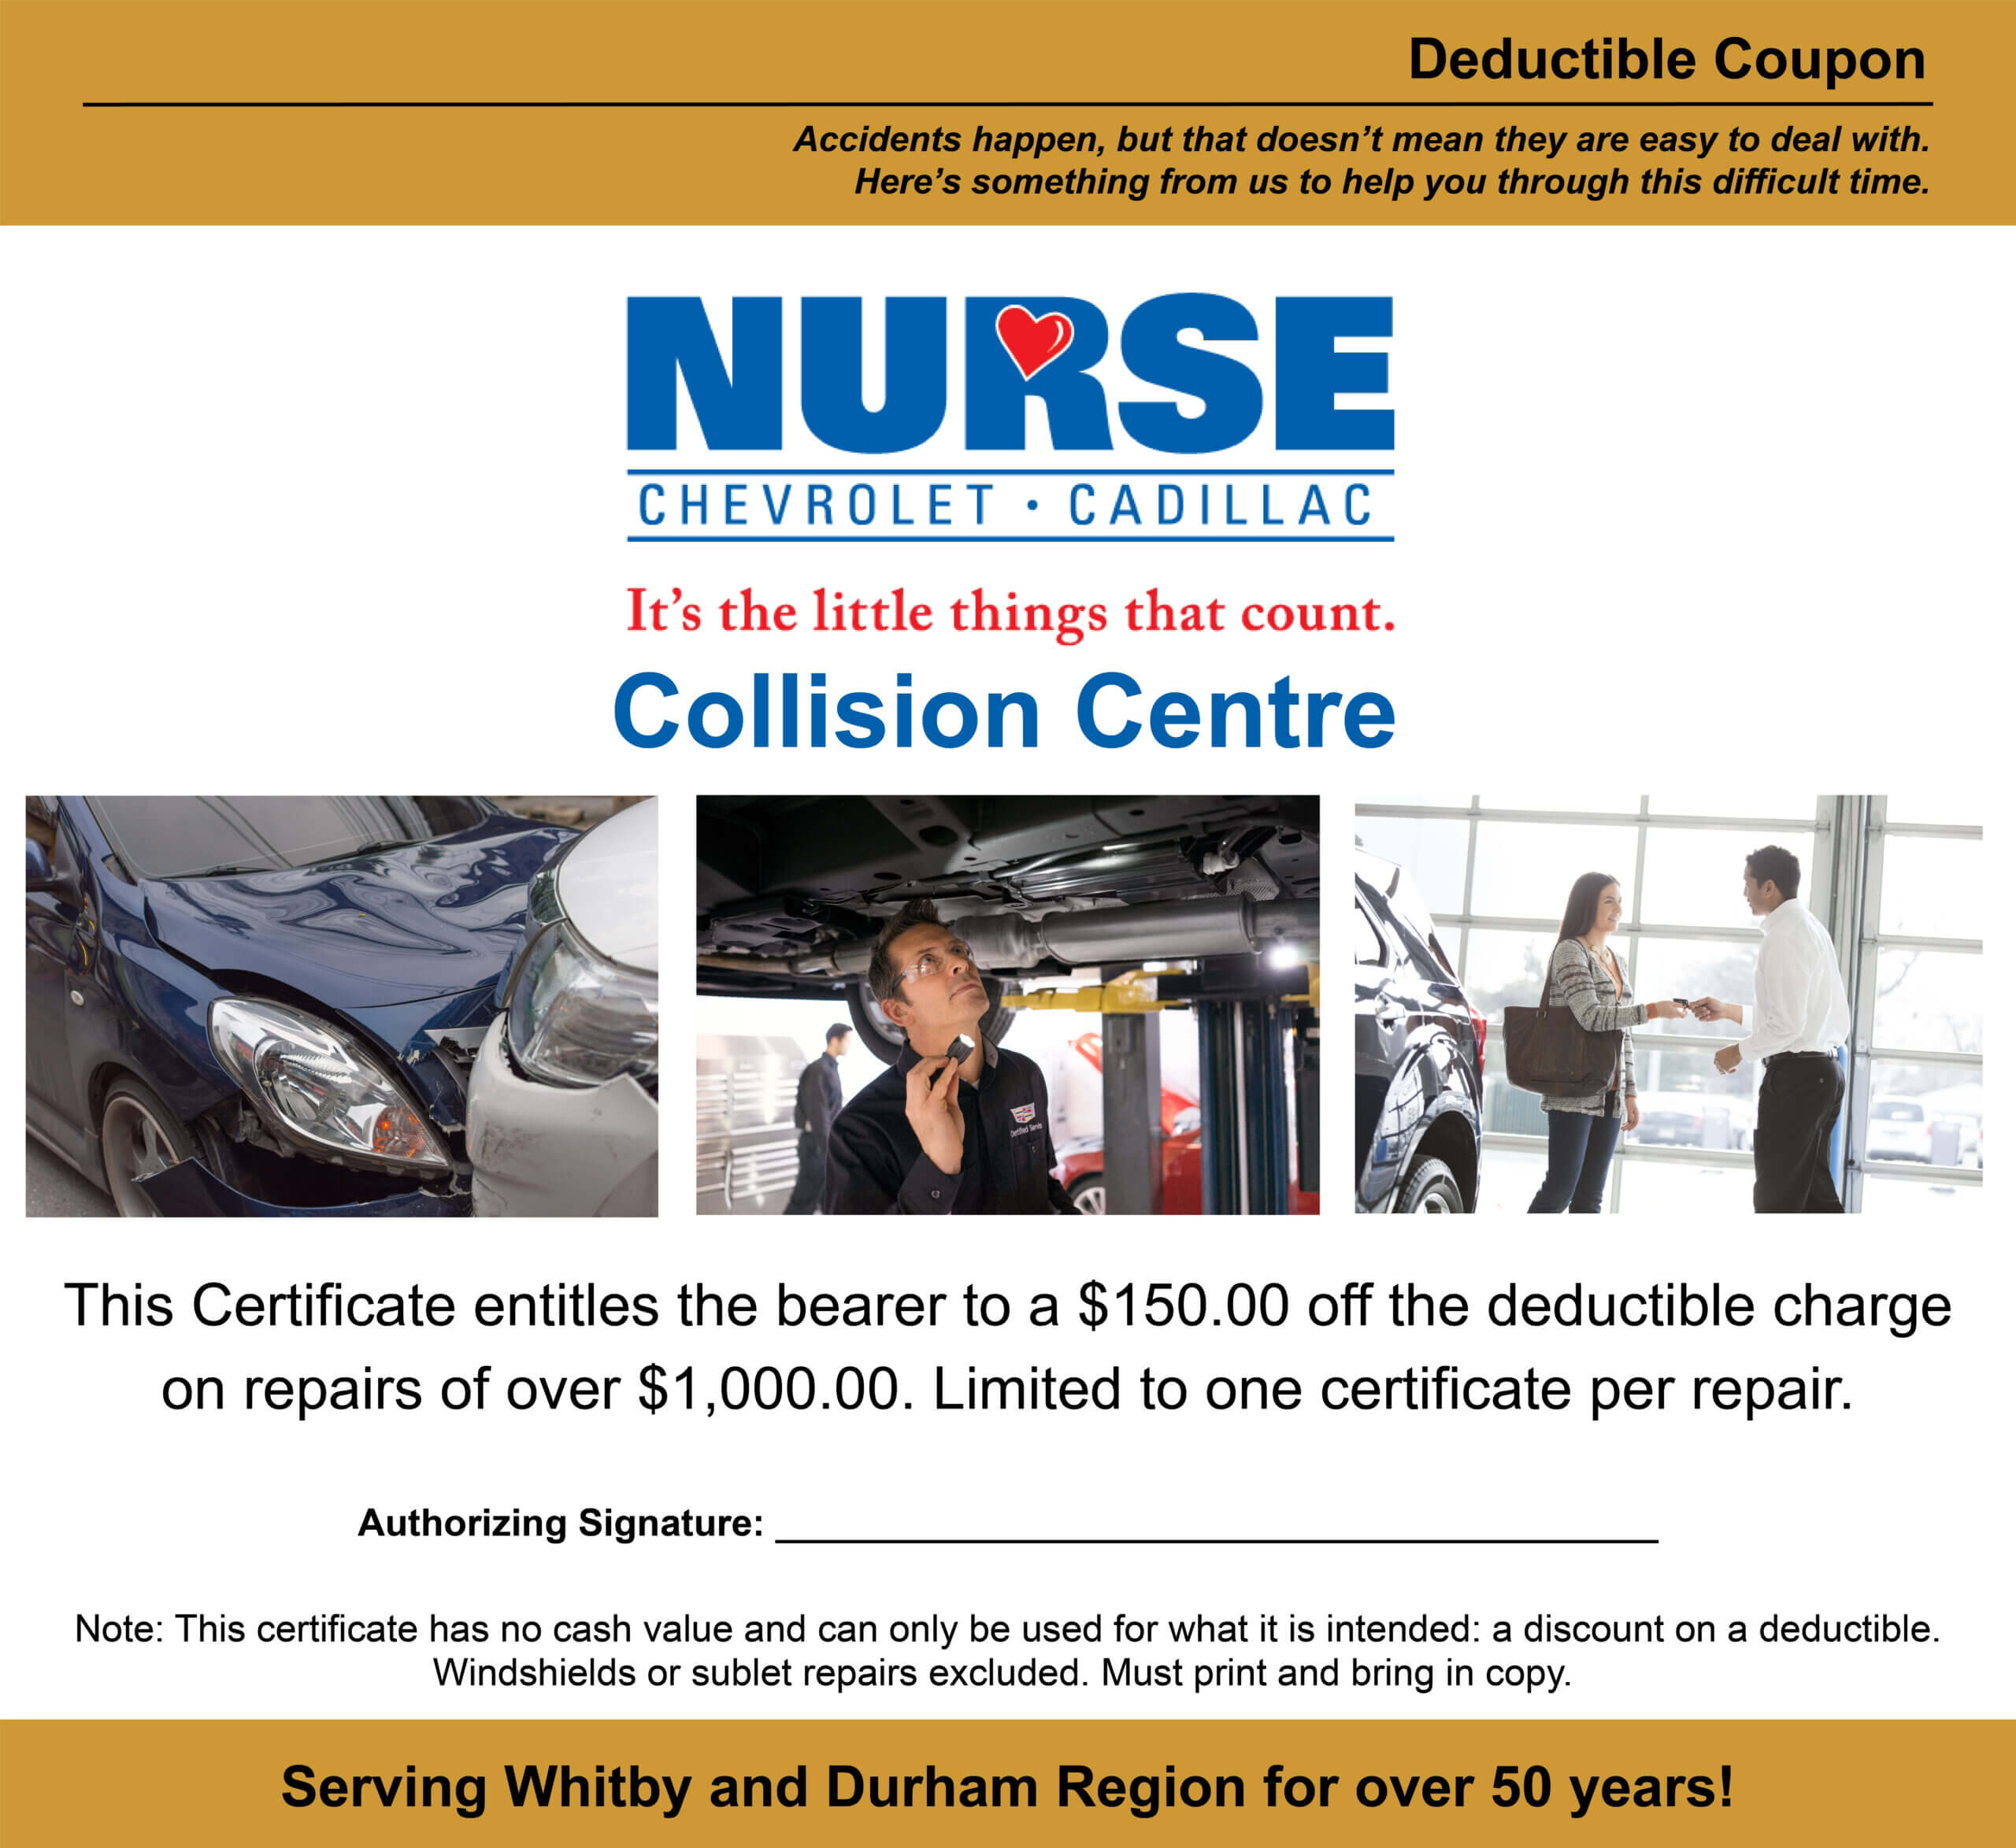 Exclusive Offers | Nurse Chevrolet Cadillac Intended For This Certificate Entitles The Bearer To Template